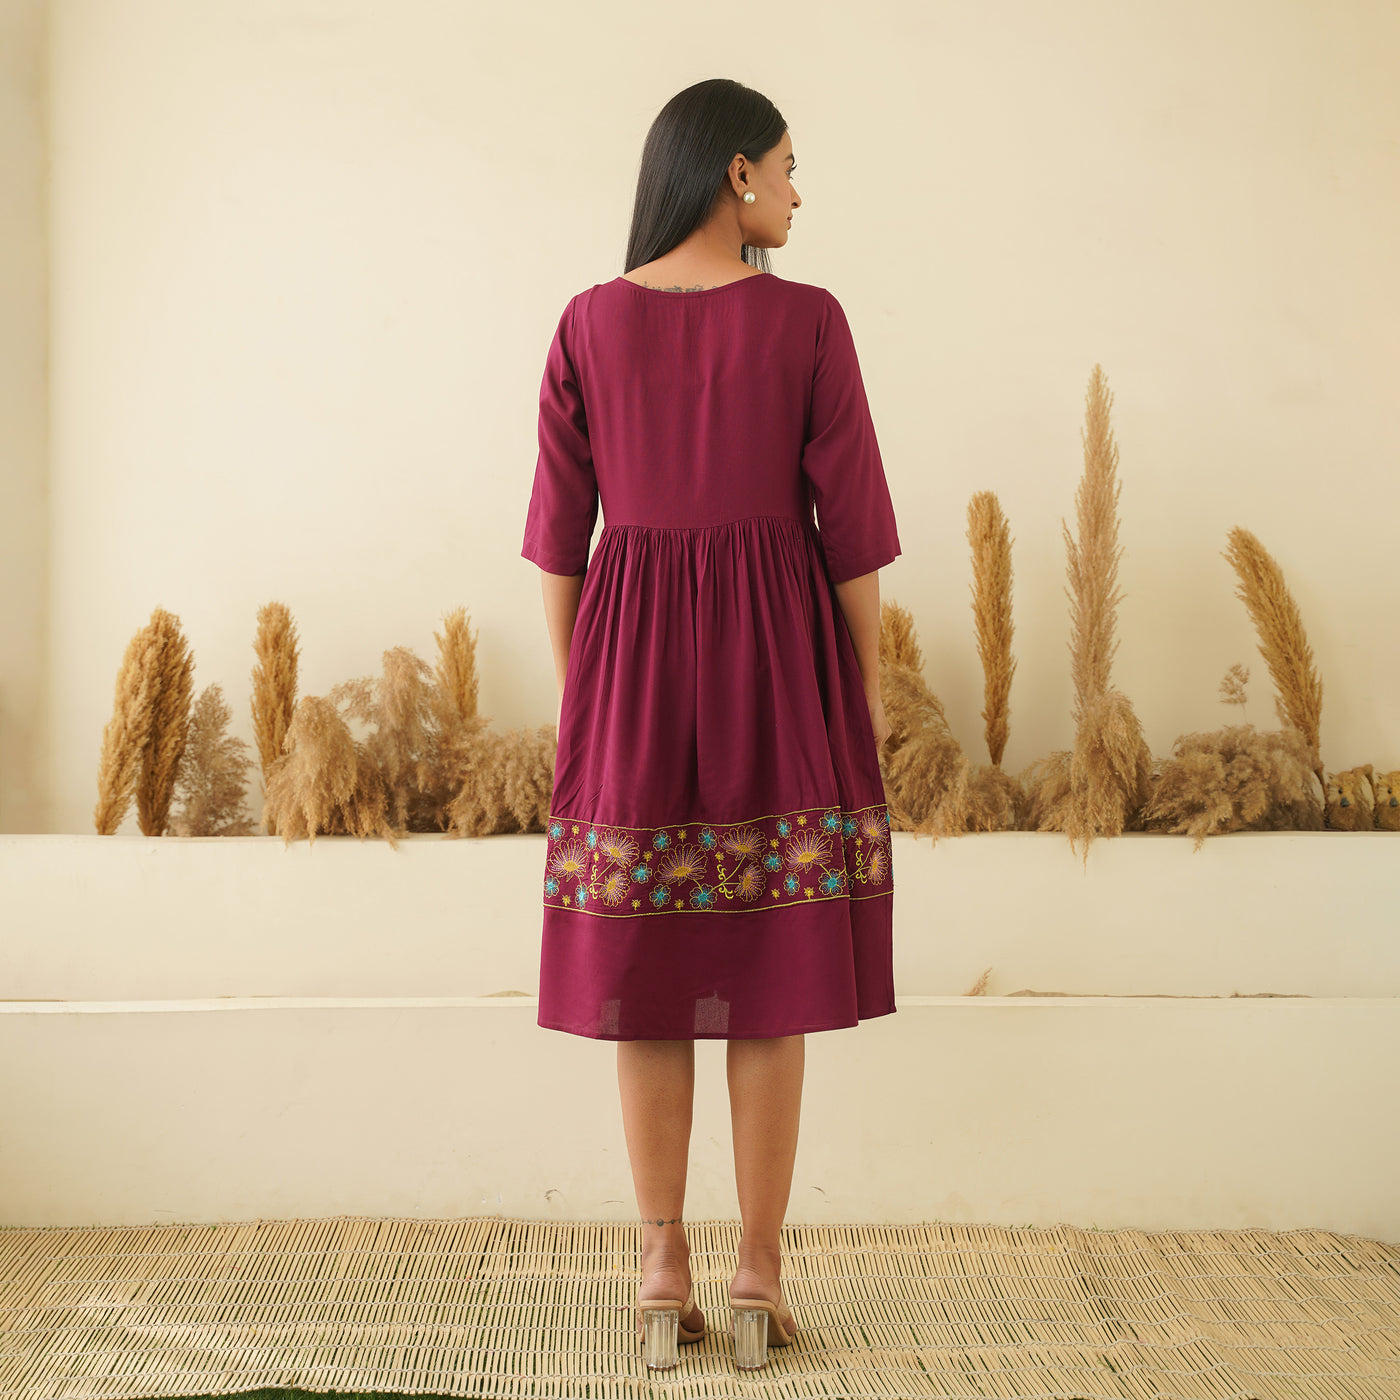 Floral Embroidery on Wine Rayon Dress with Pockets